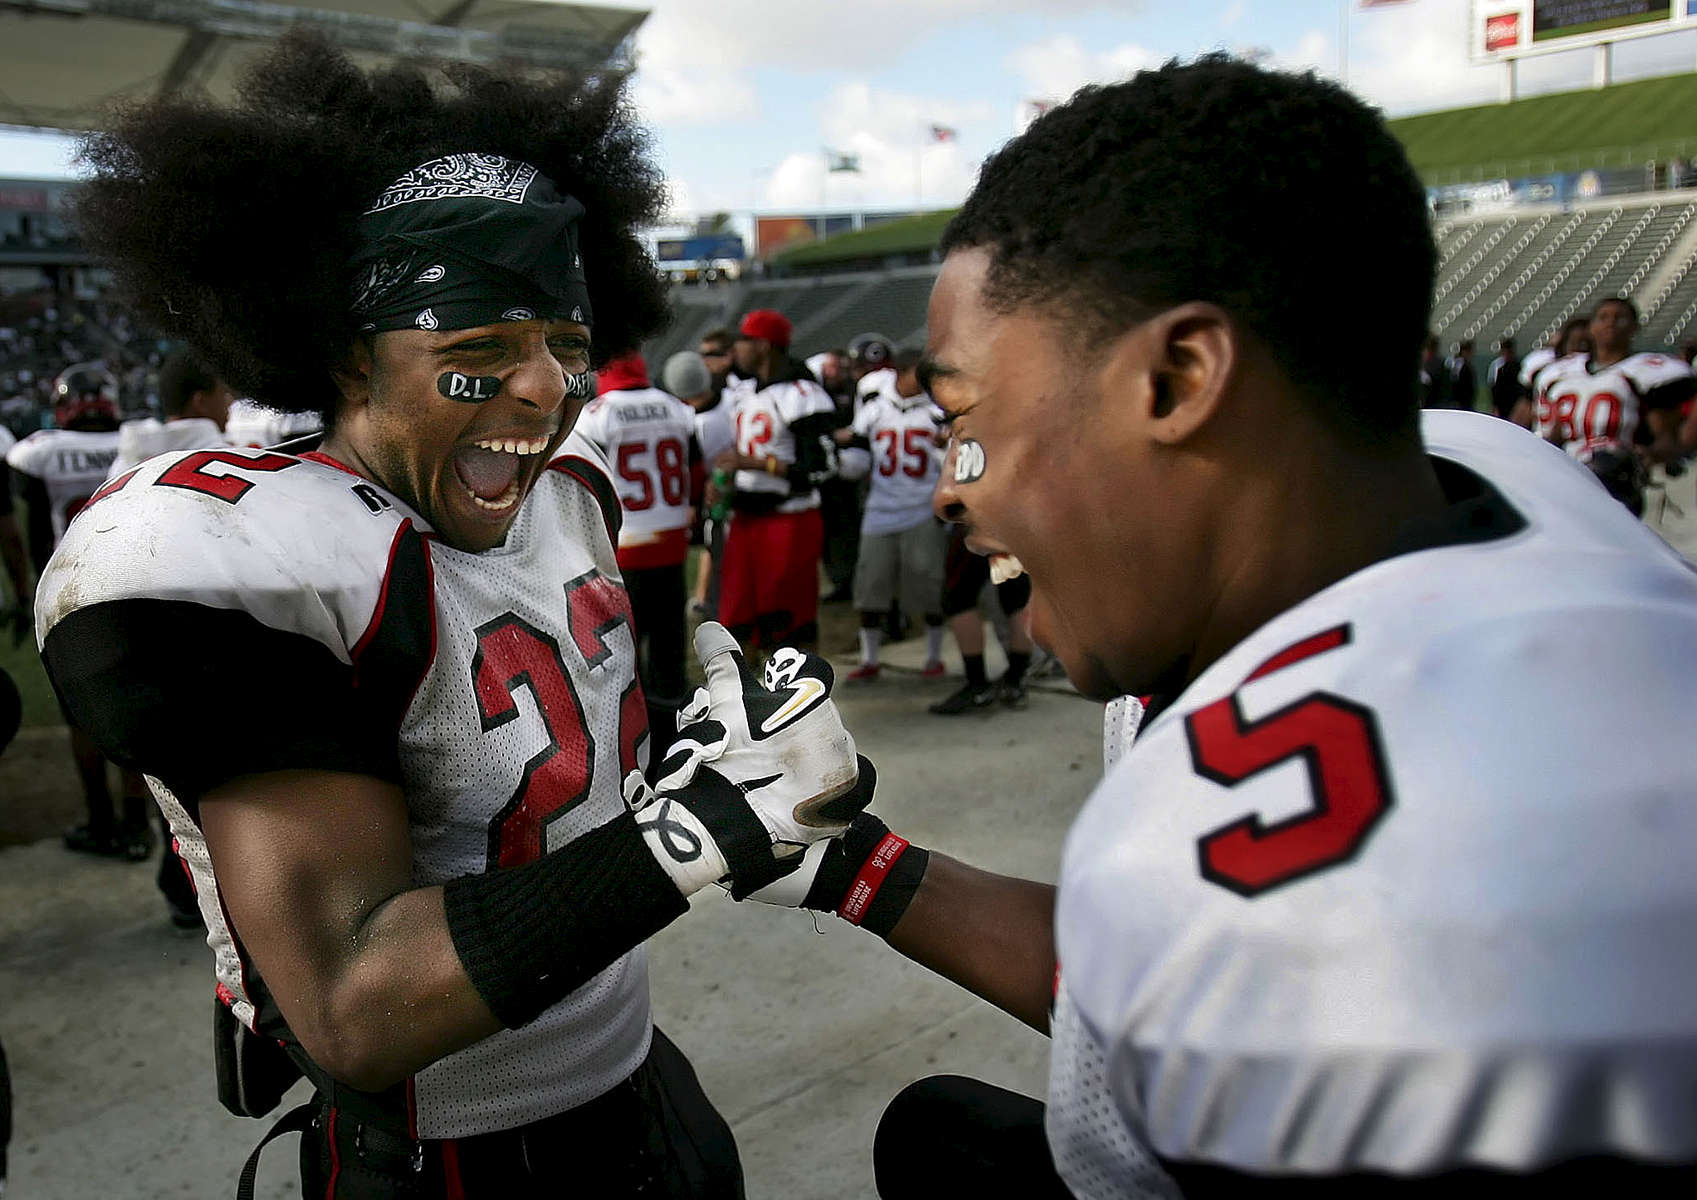 Corona, Calif., Centennial's Jerry Hardeman, left, and Marsel Posey celebrate on the bench before the end of the game. Corona Centennial beat Corona Santiago 42-7 to win the CIF Southern Section Inland Division Championship at the Home Depot Center in Carson Calif. (The Press-Enterprise/ Mark Zaleski)